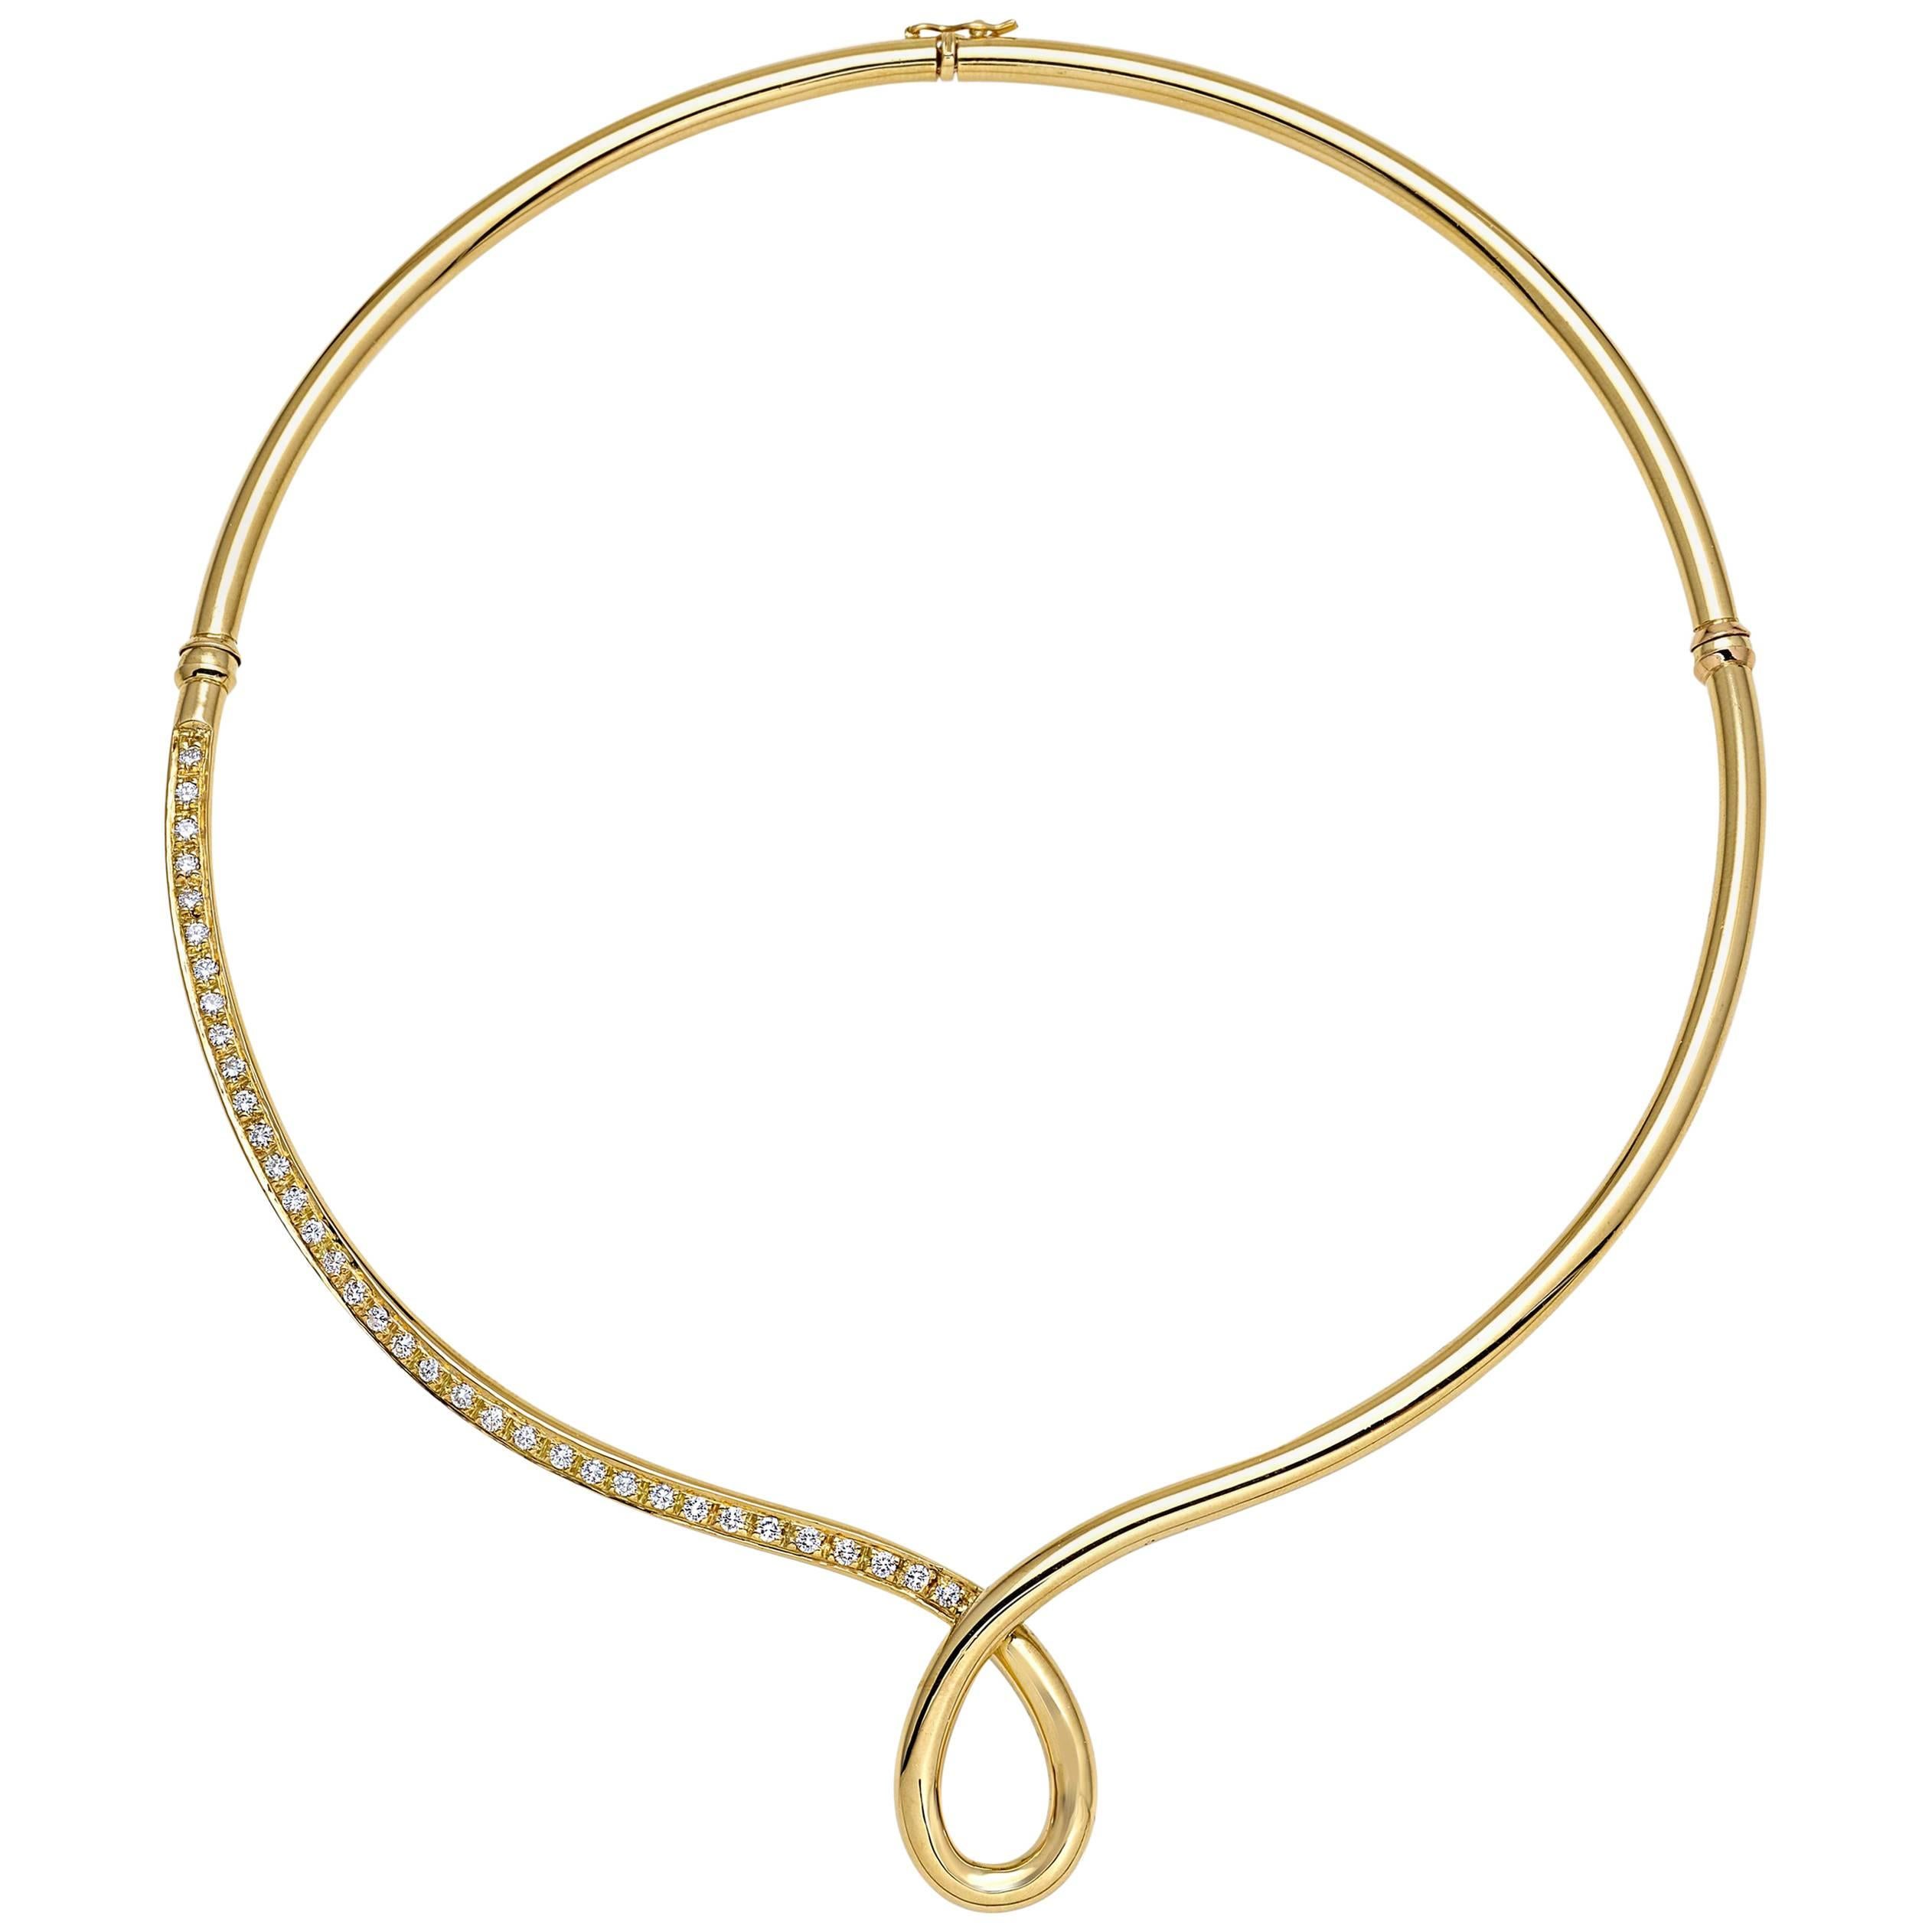 Necklace from the Collection "Essence" 18 Karat Yellow Gold and Diamonds